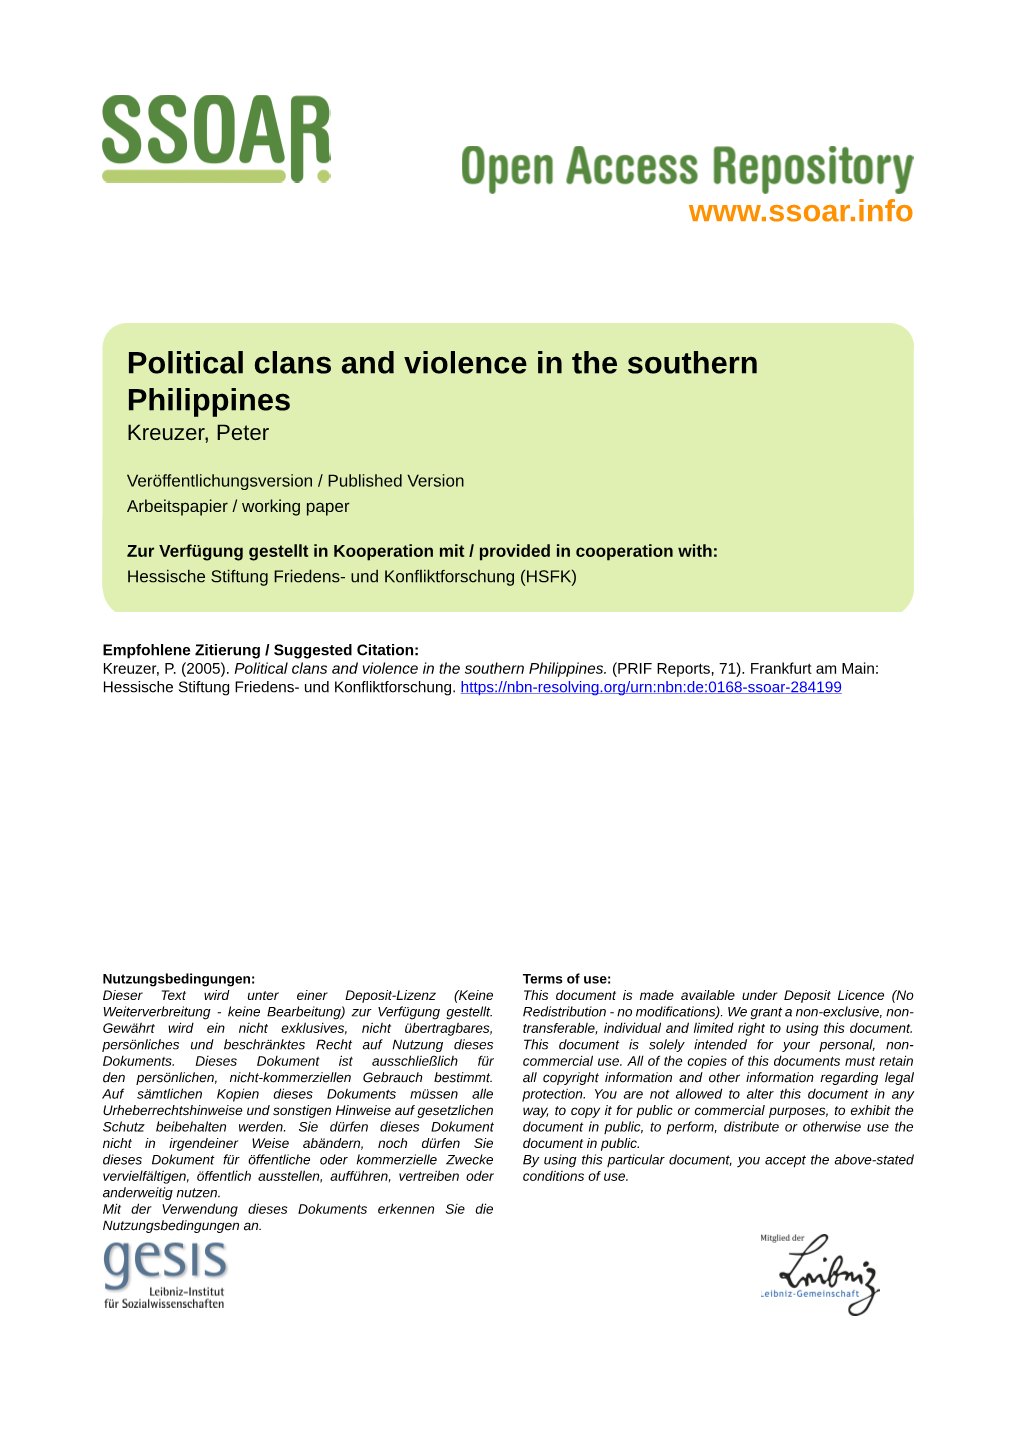 Political Clans and Violence in the Southern Philippines Kreuzer, Peter